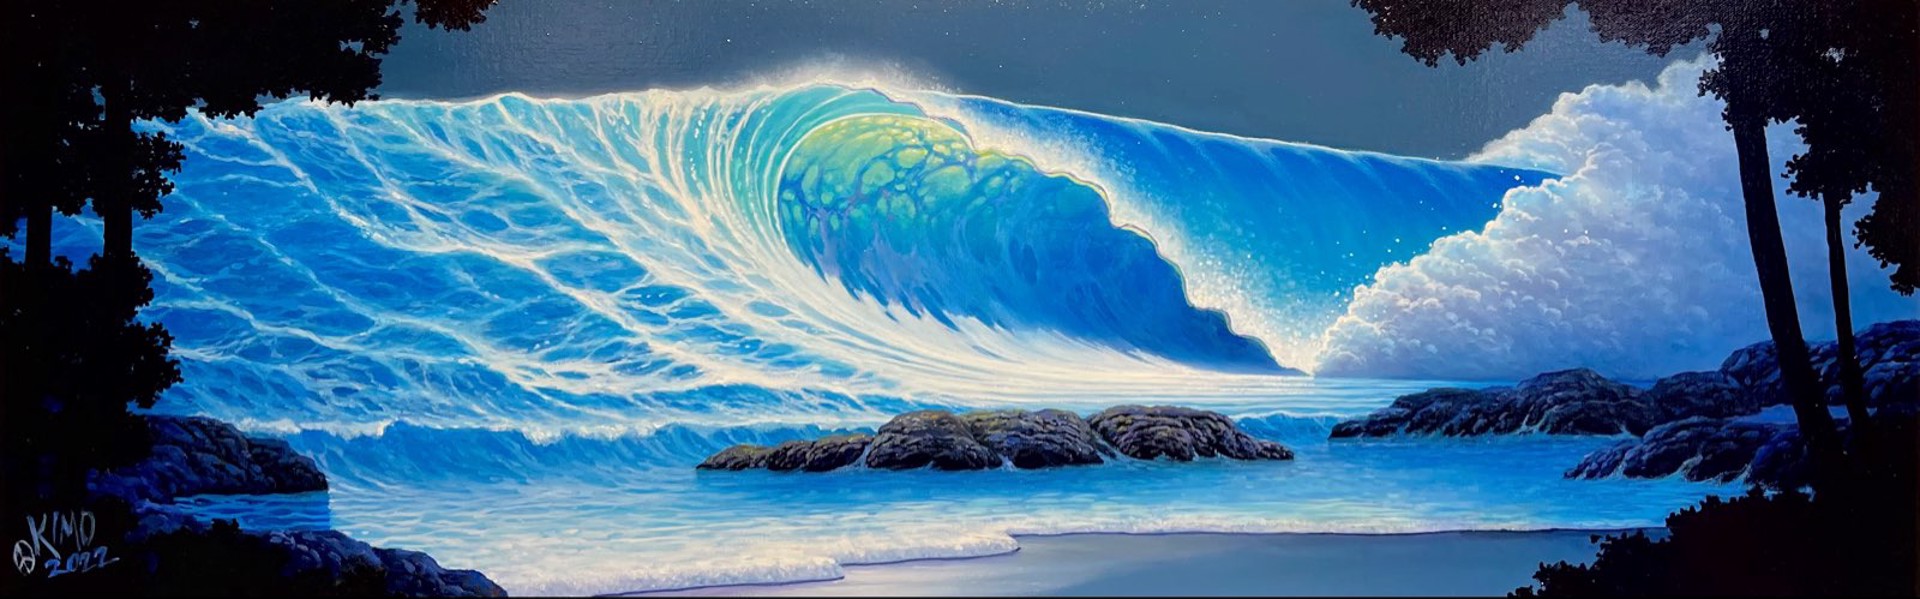 Blue Wave by Kimo